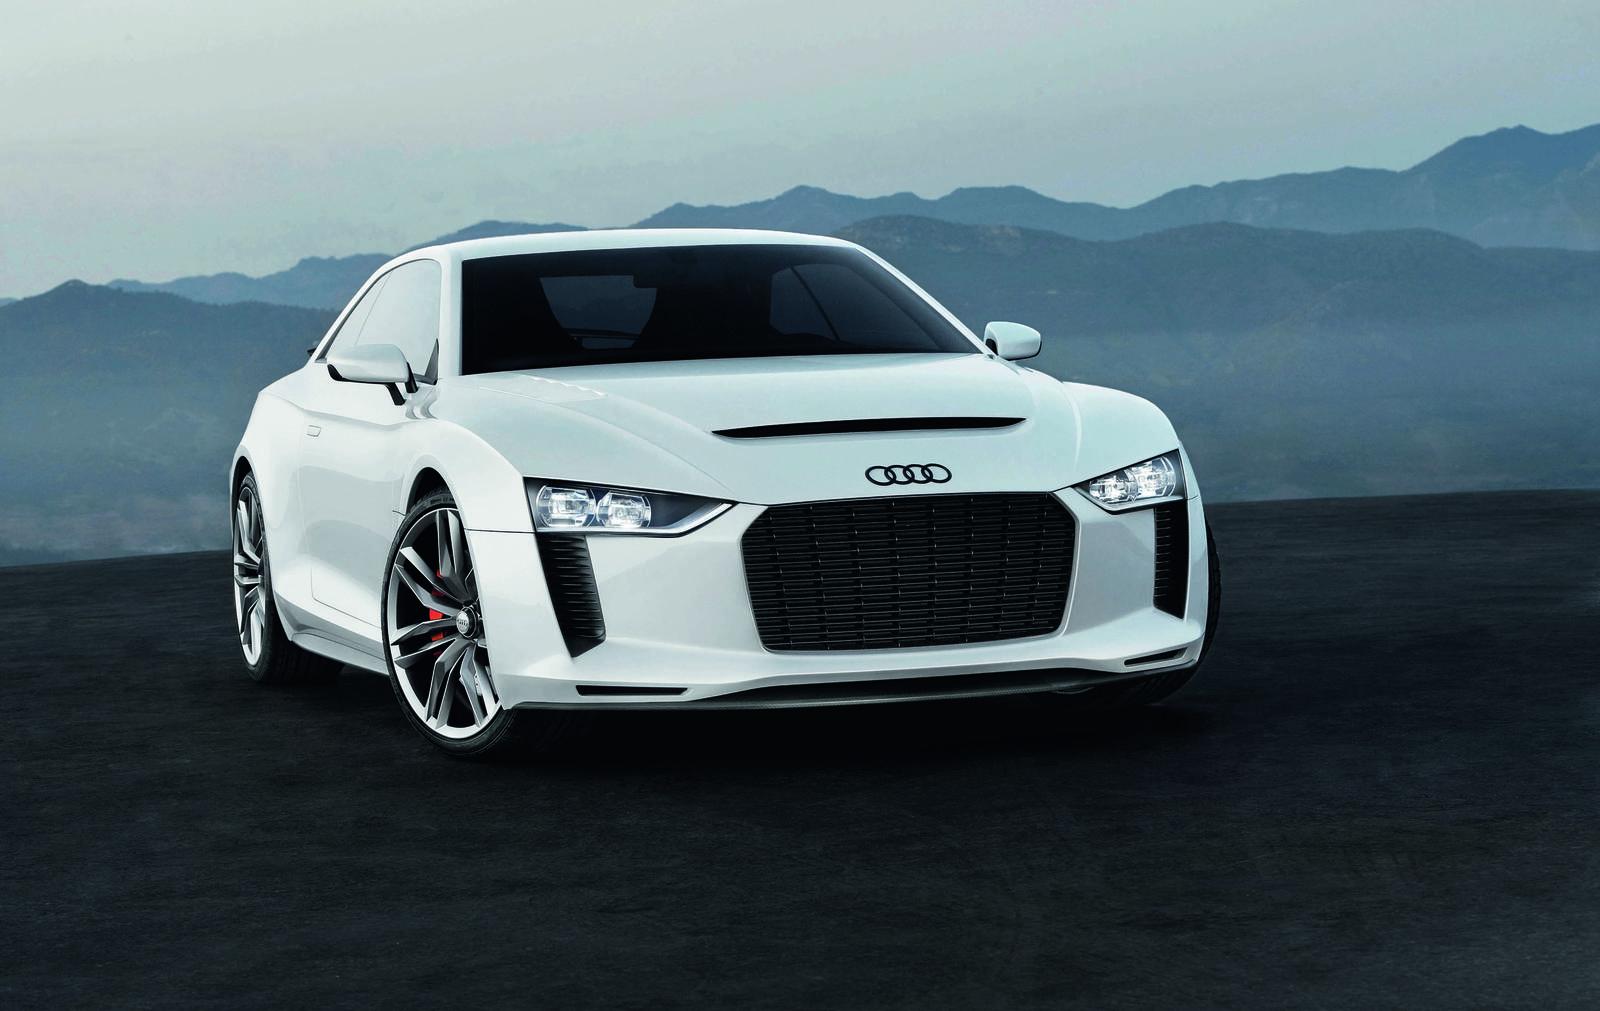 Audi Sport Quattro Laserlight concept officially debuts at CES